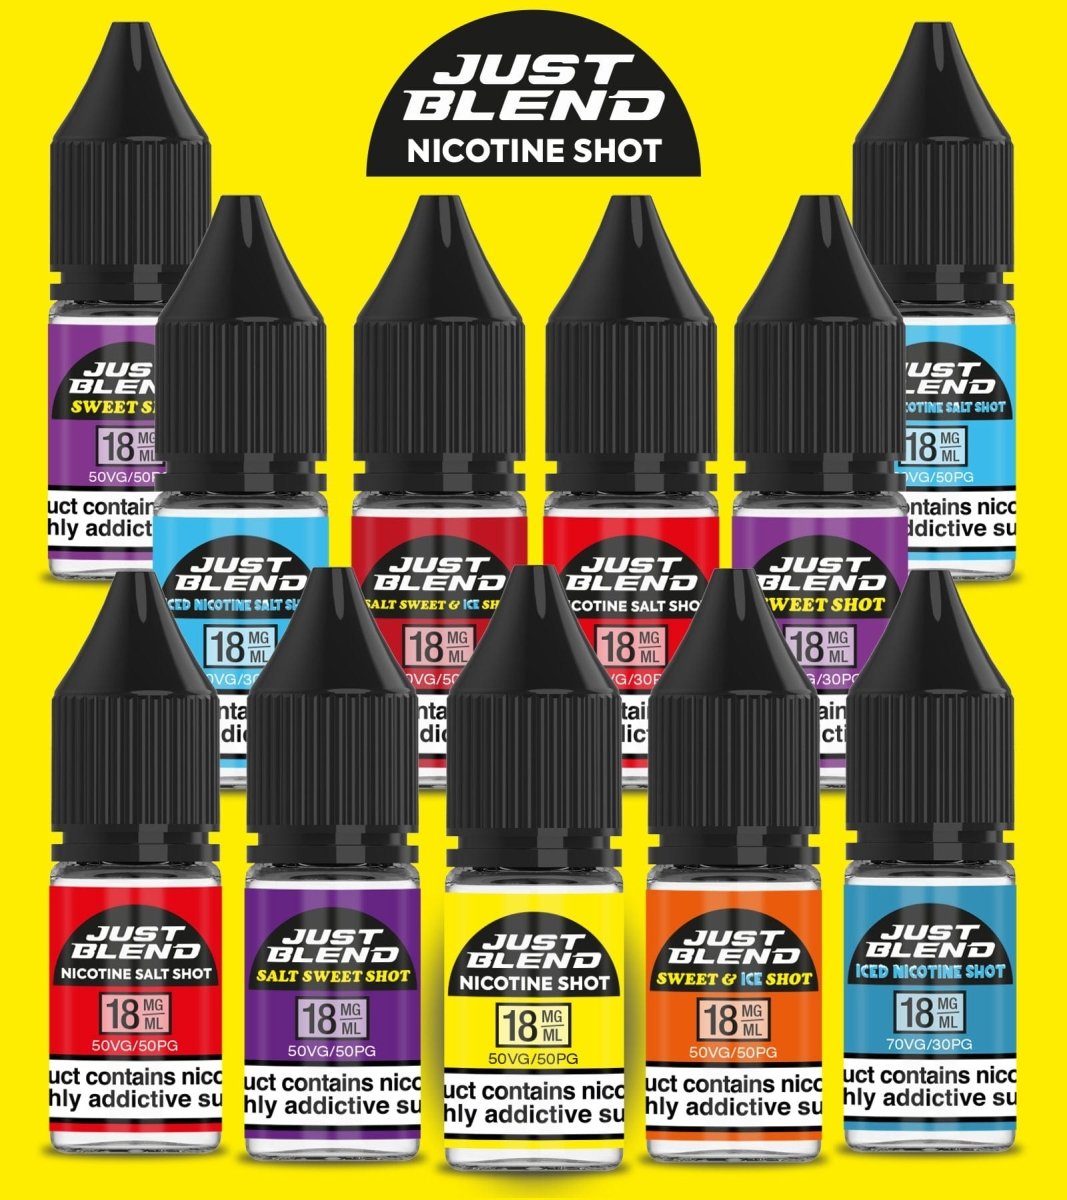 Just Blend - Just Blend Iced Nicotine Salt Shots - 18mg/70vg - Pack of 100 - theno1plugshop